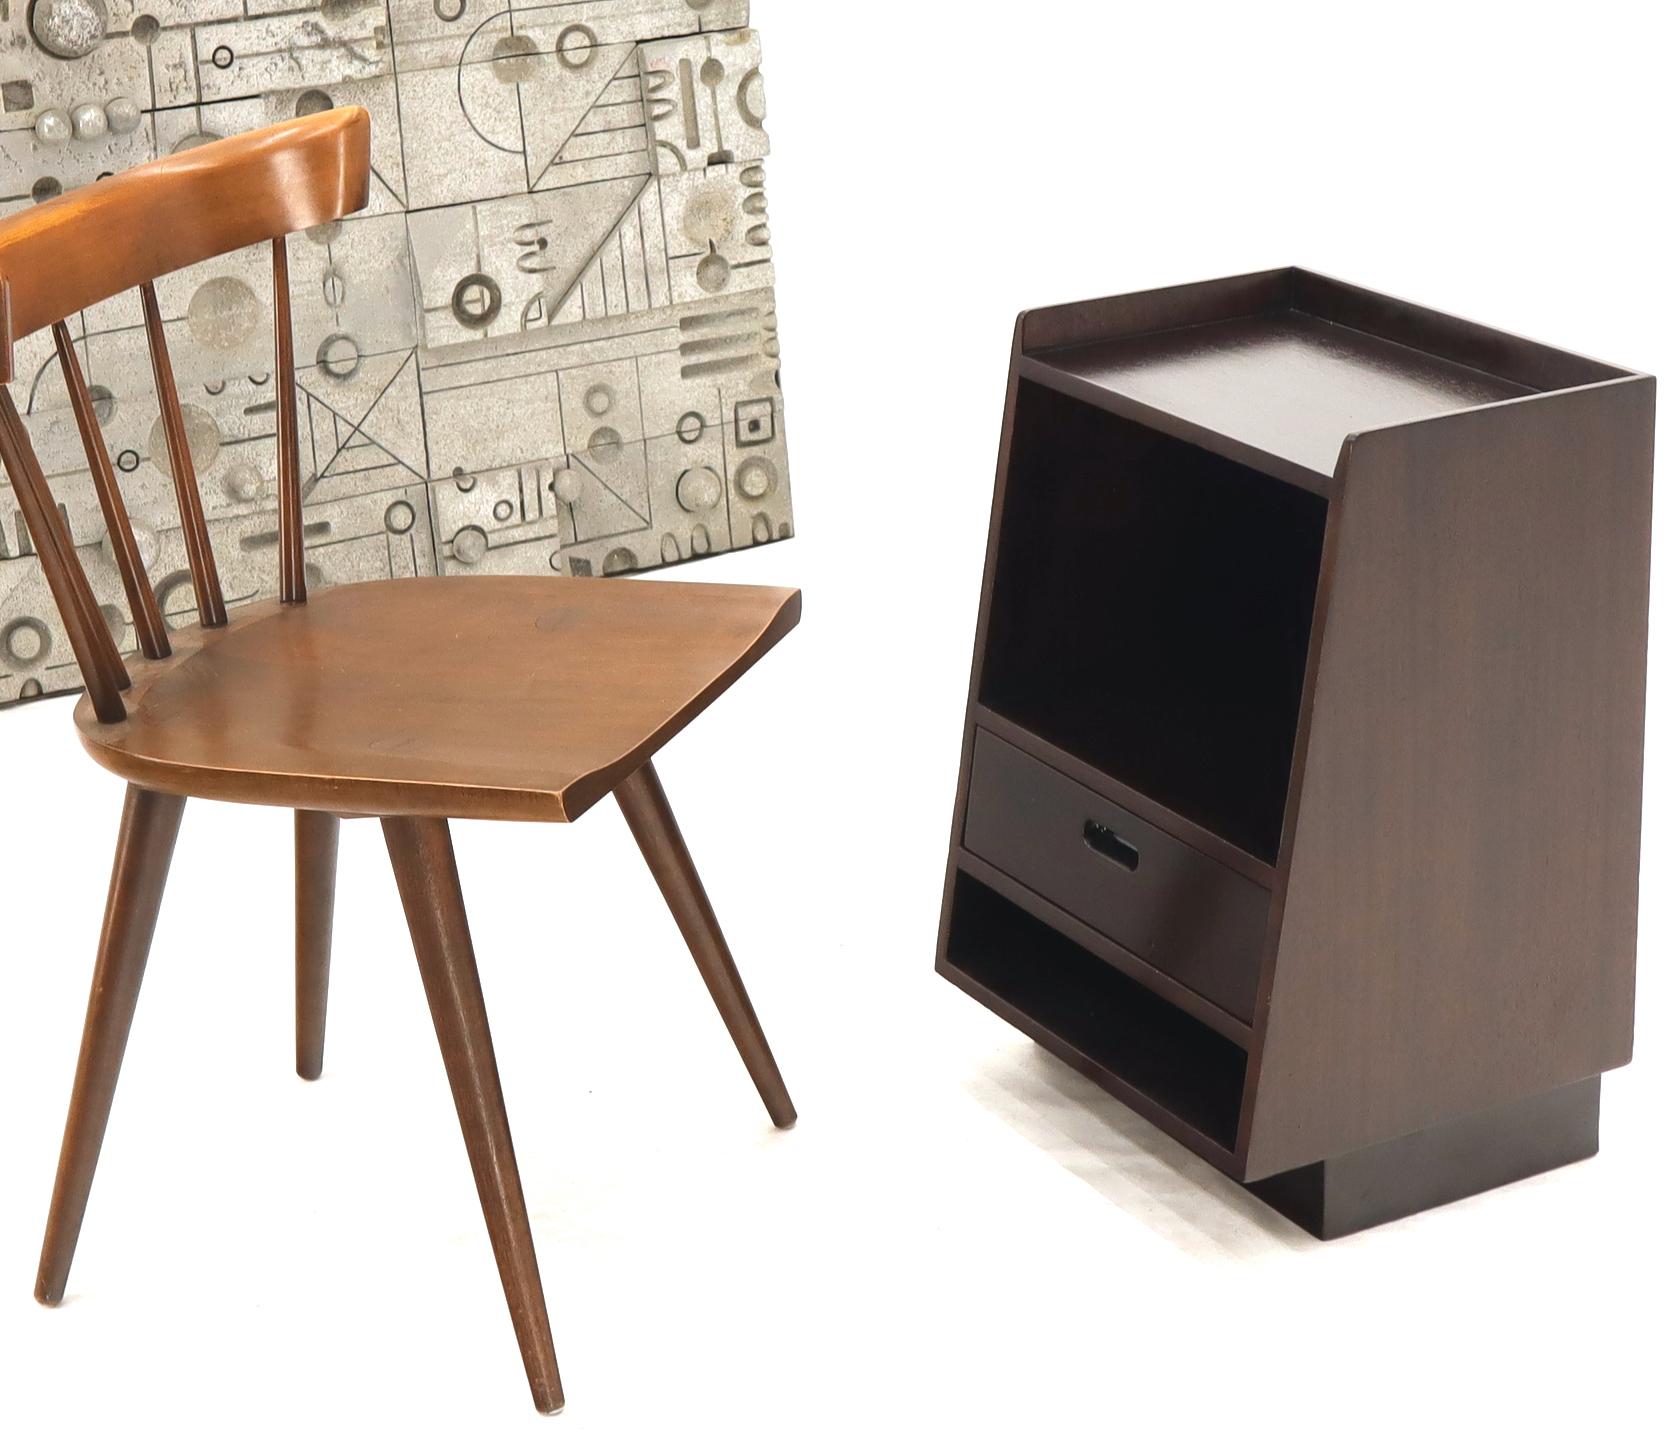 Pair of expresso finish mahogany nightstands by Edward Warmley for Dunbar on lacquered leather bases.